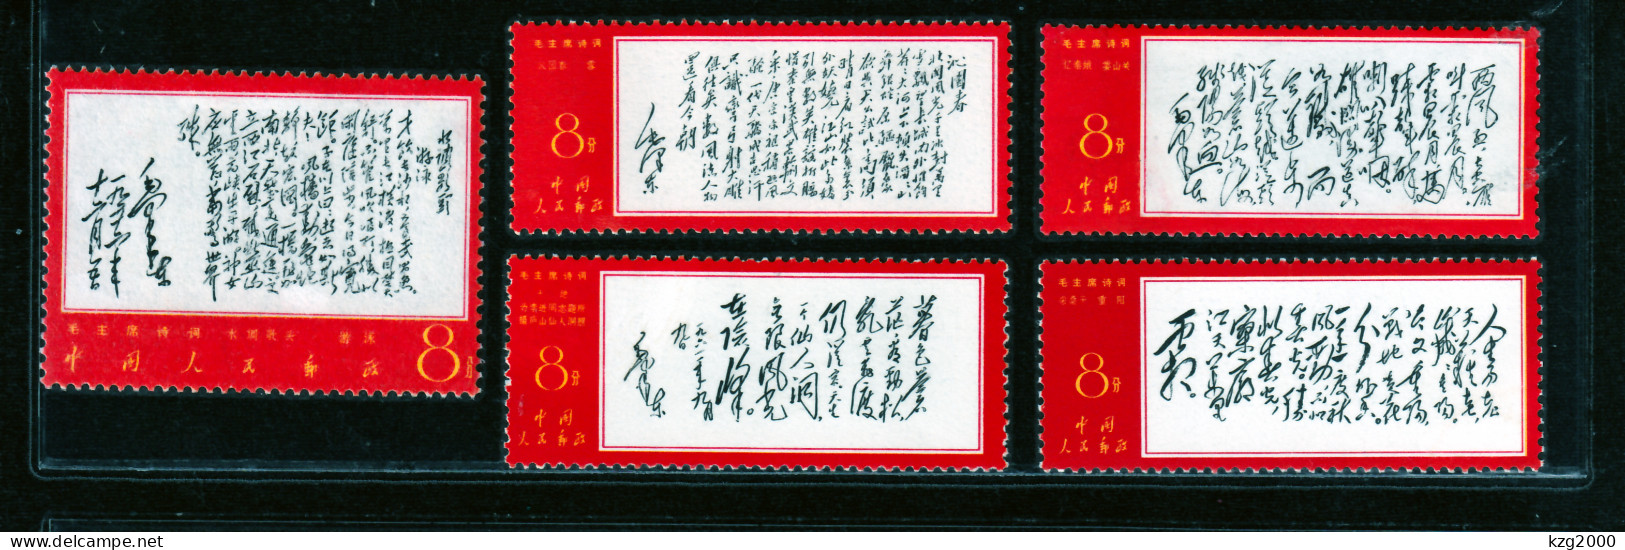 China Stamp 1967 W7 Poems of Chairman Mao MNH with Certificate Stamps